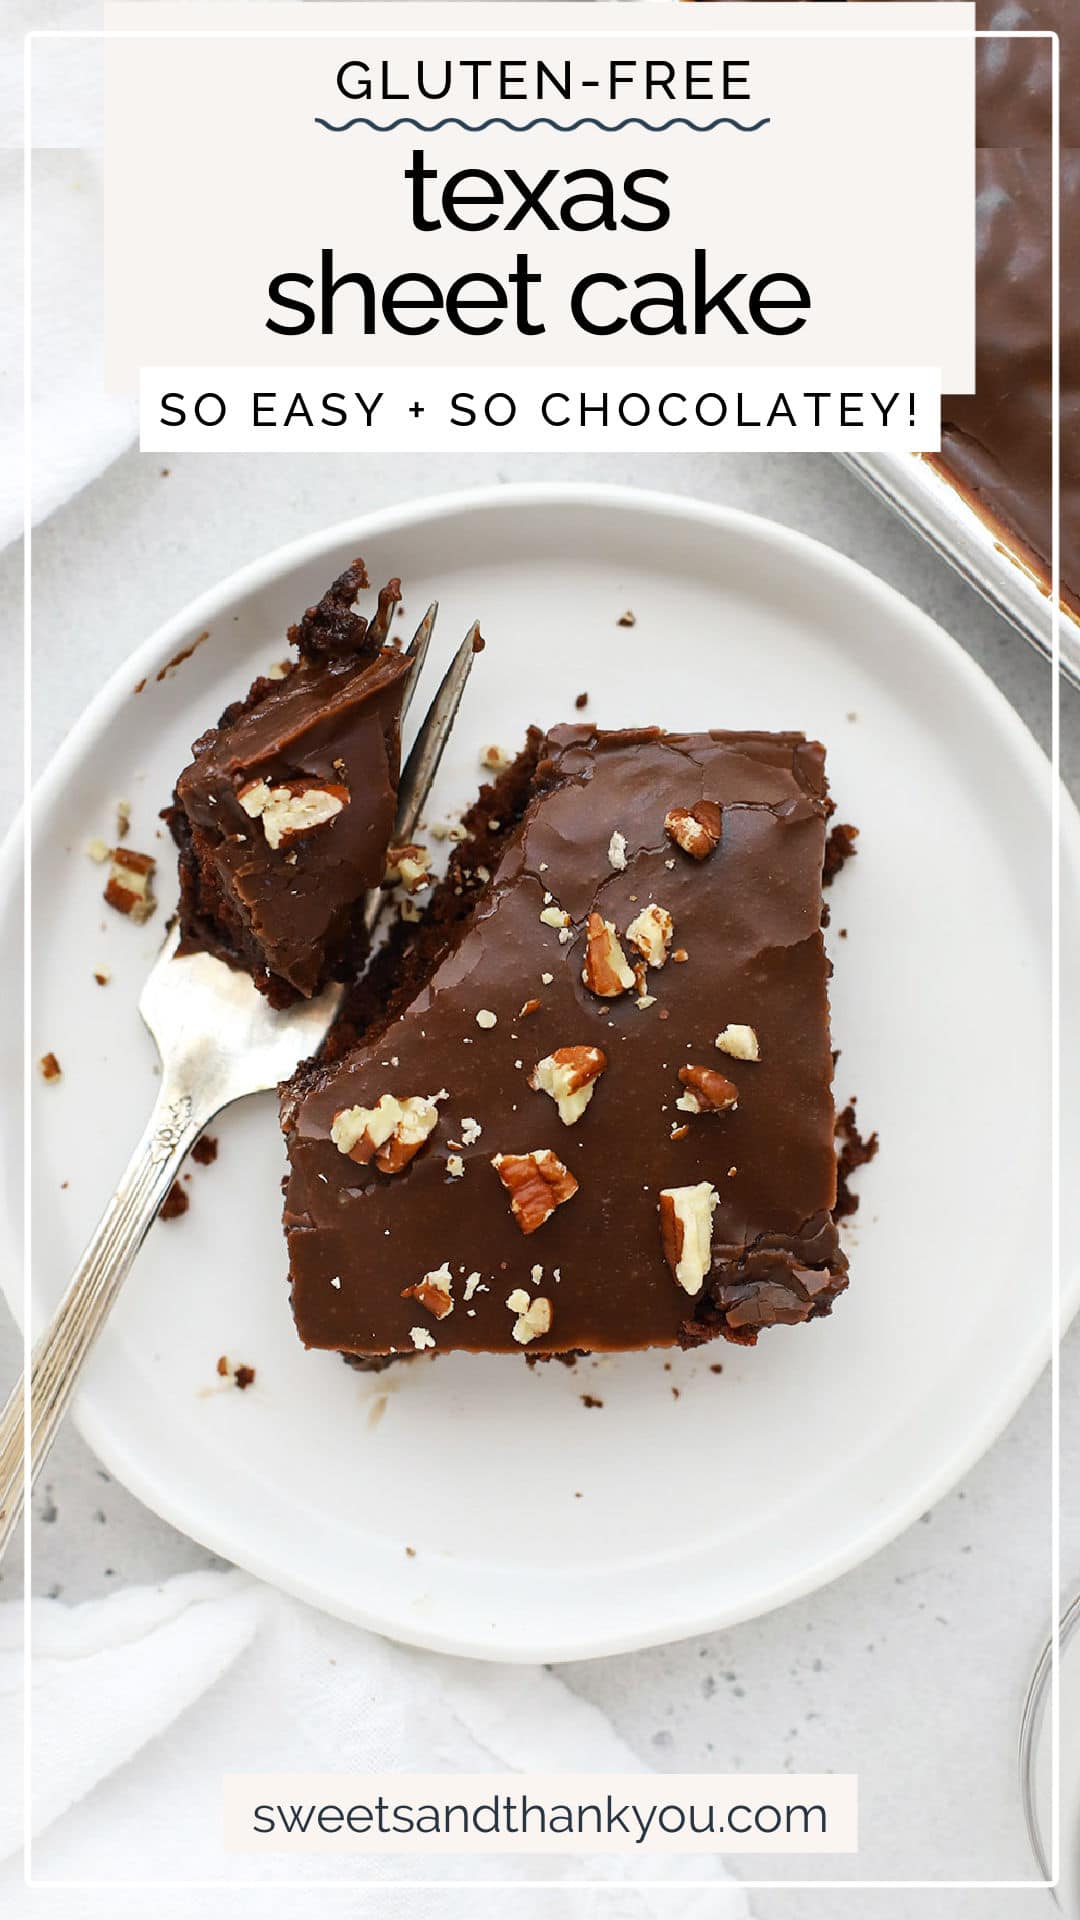 Gluten-Free Texas Sheet Cake - This is the gluten-free Texas chocolate sheet cake recipe you've been waiting for! All the classic chocolate flavor & delicious texture you love--just made gluten-free! // easy gluten free chocolate sheet cake recipe // gluten free chocolate cake recipe // gluten free chocolate cake with chocolate frosting // easy gluten free cake recipe // gluten free texas sheet cake with pecans // gluten free texas sheet cake without pecans